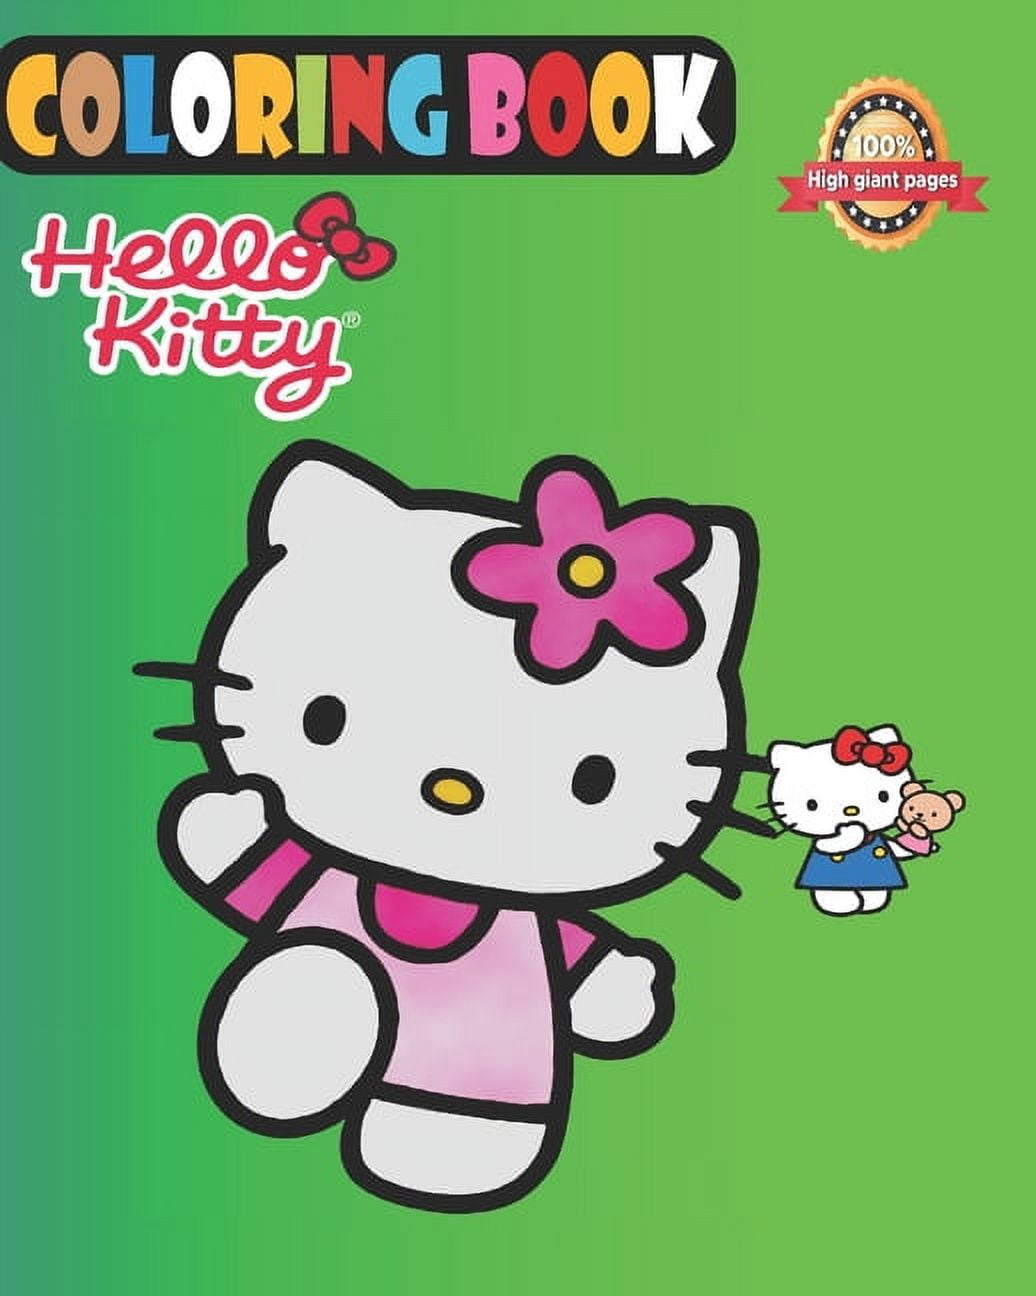 Hello Kitty Advanced Coloring Book | Think Kids